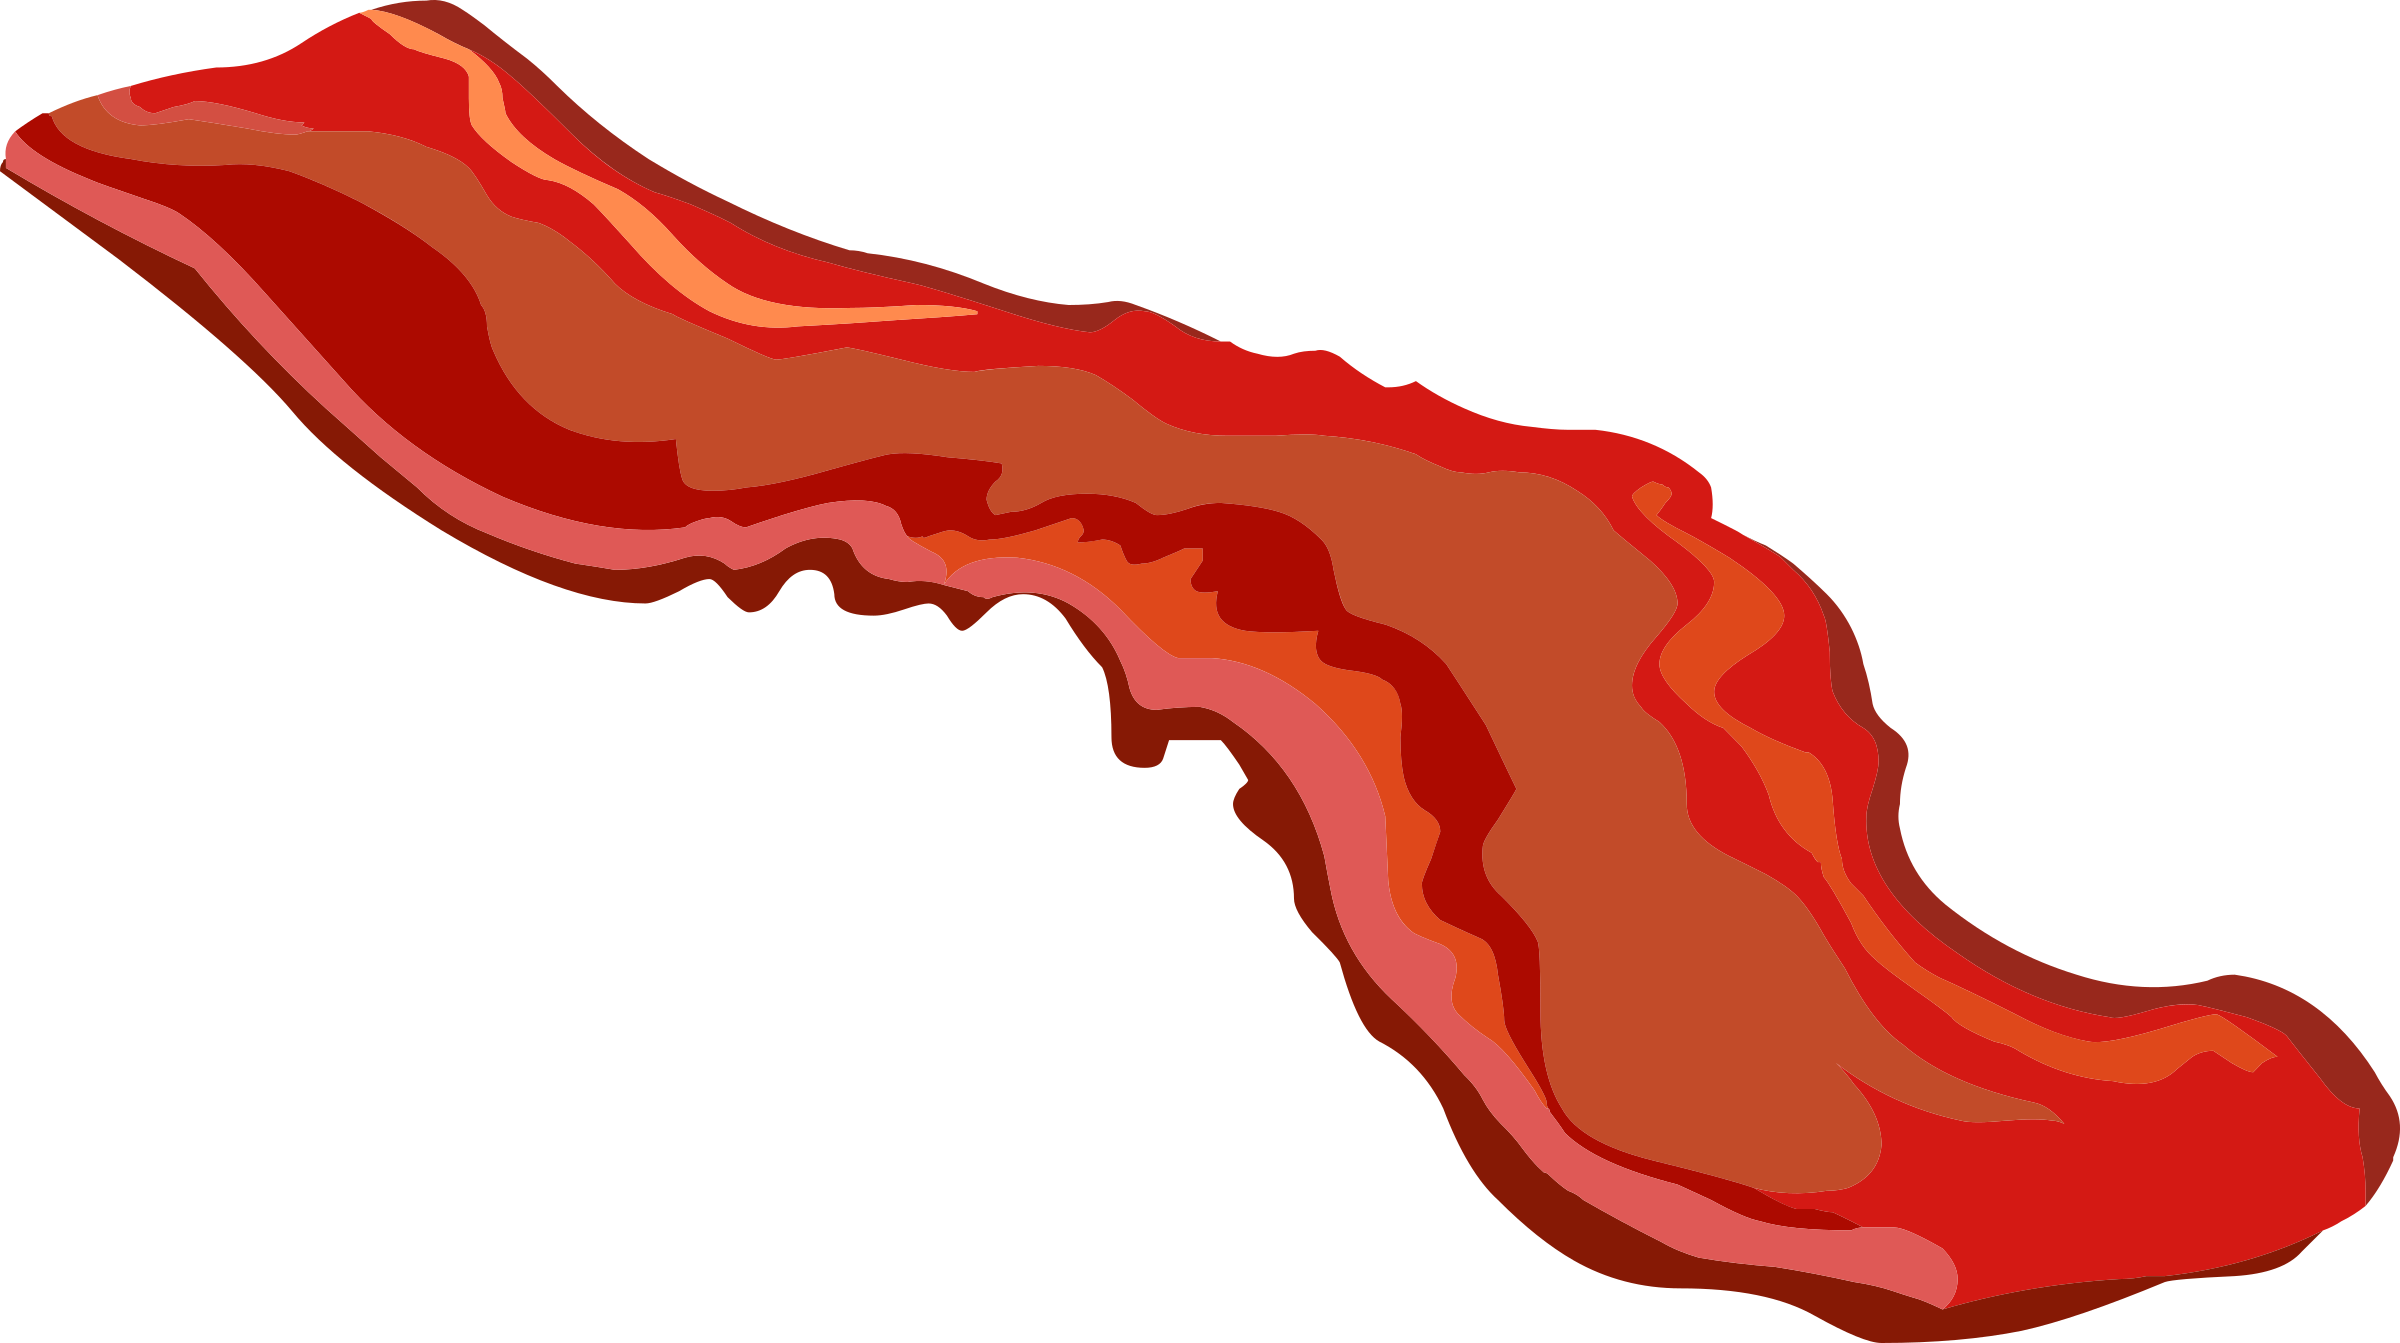 Bacon Free Download Png PNG Image